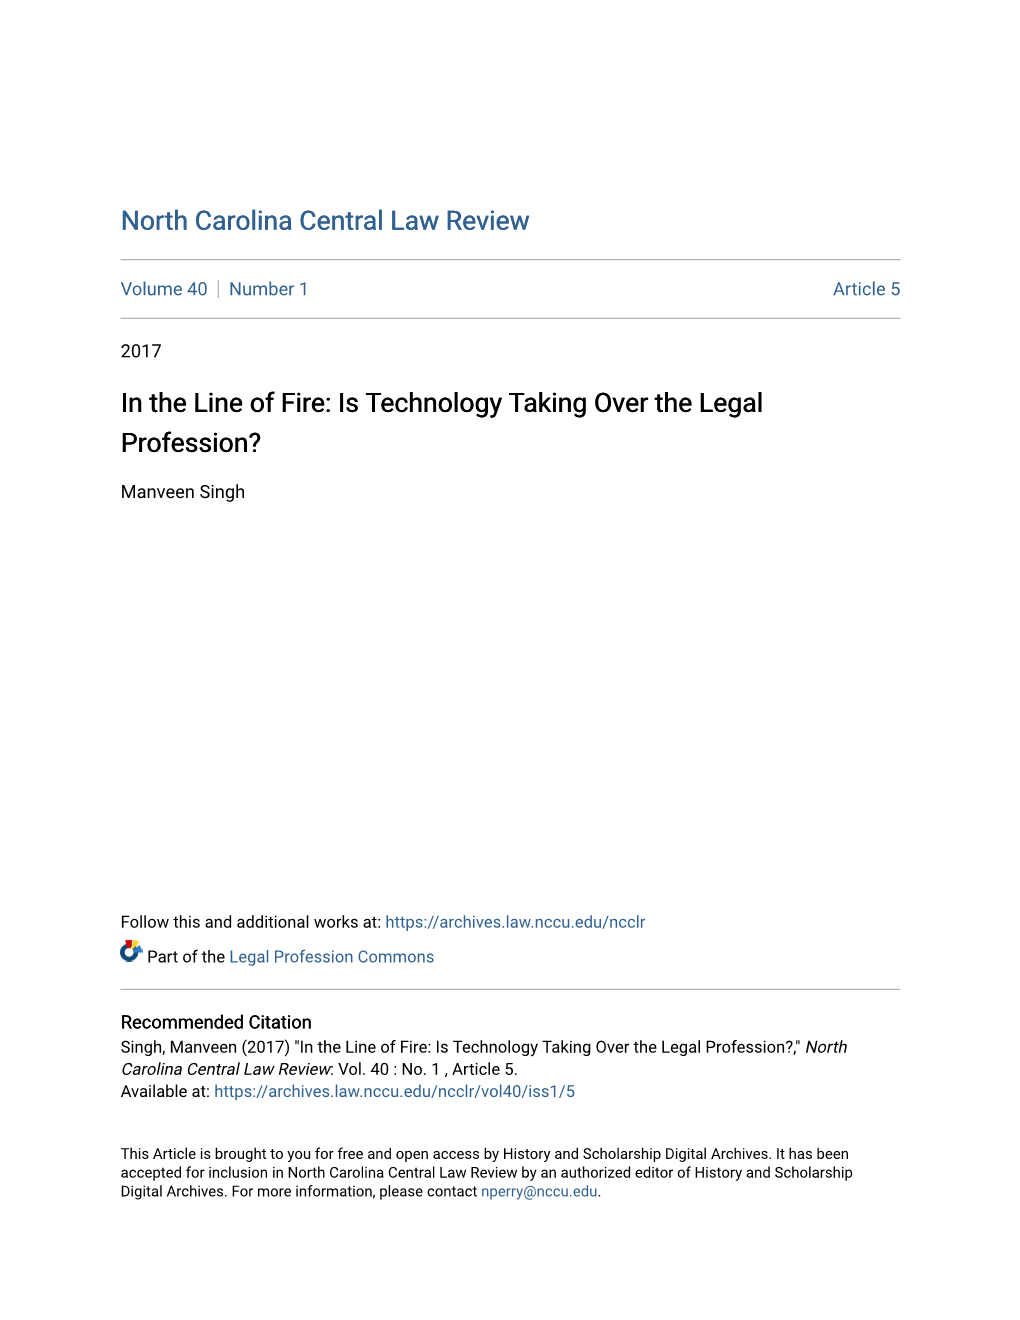 In the Line of Fire: Is Technology Taking Over the Legal Profession?